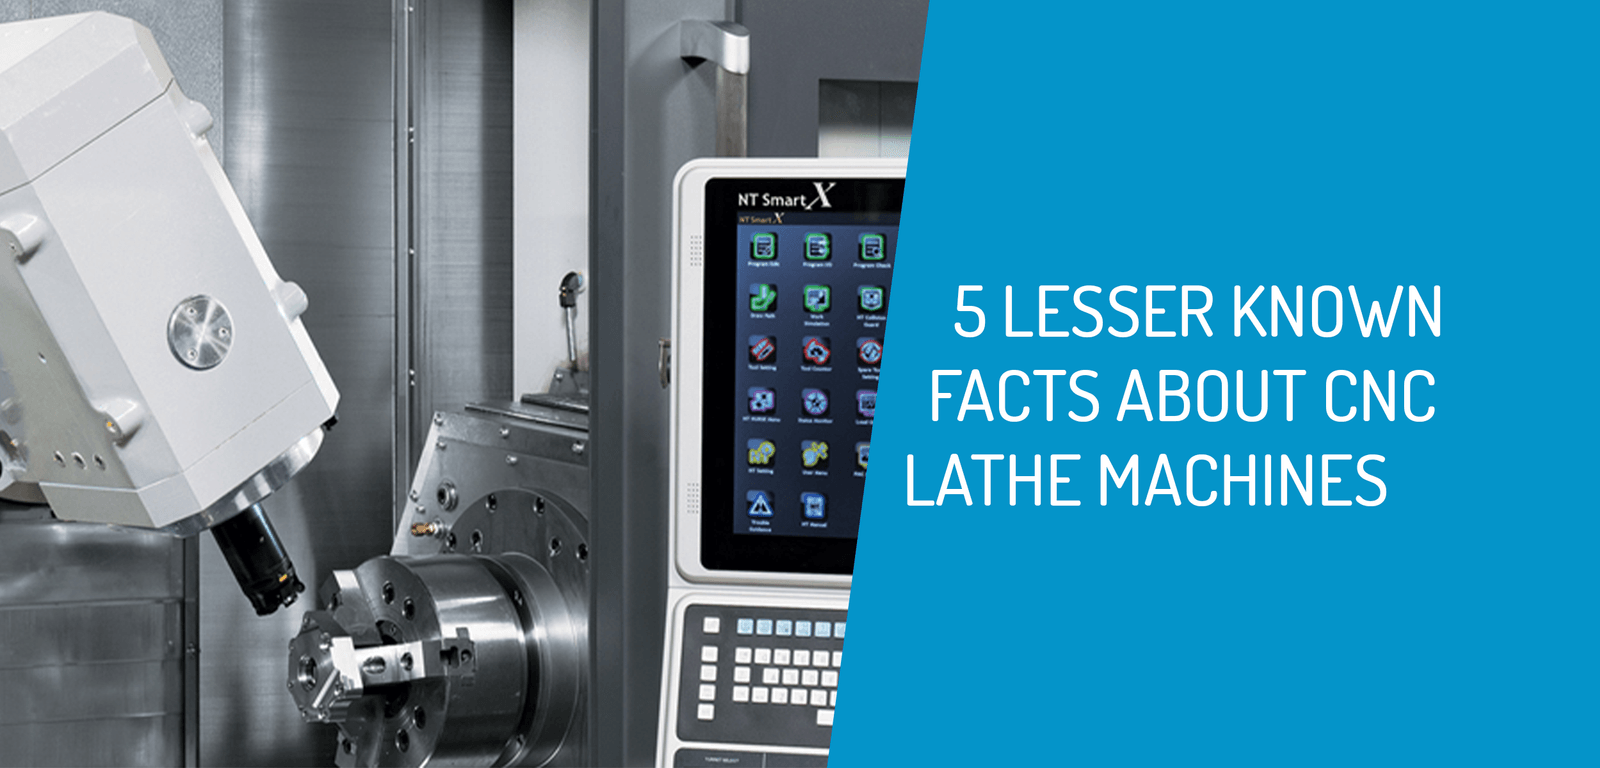 5 Lesser Known Facts About CNC Lathes